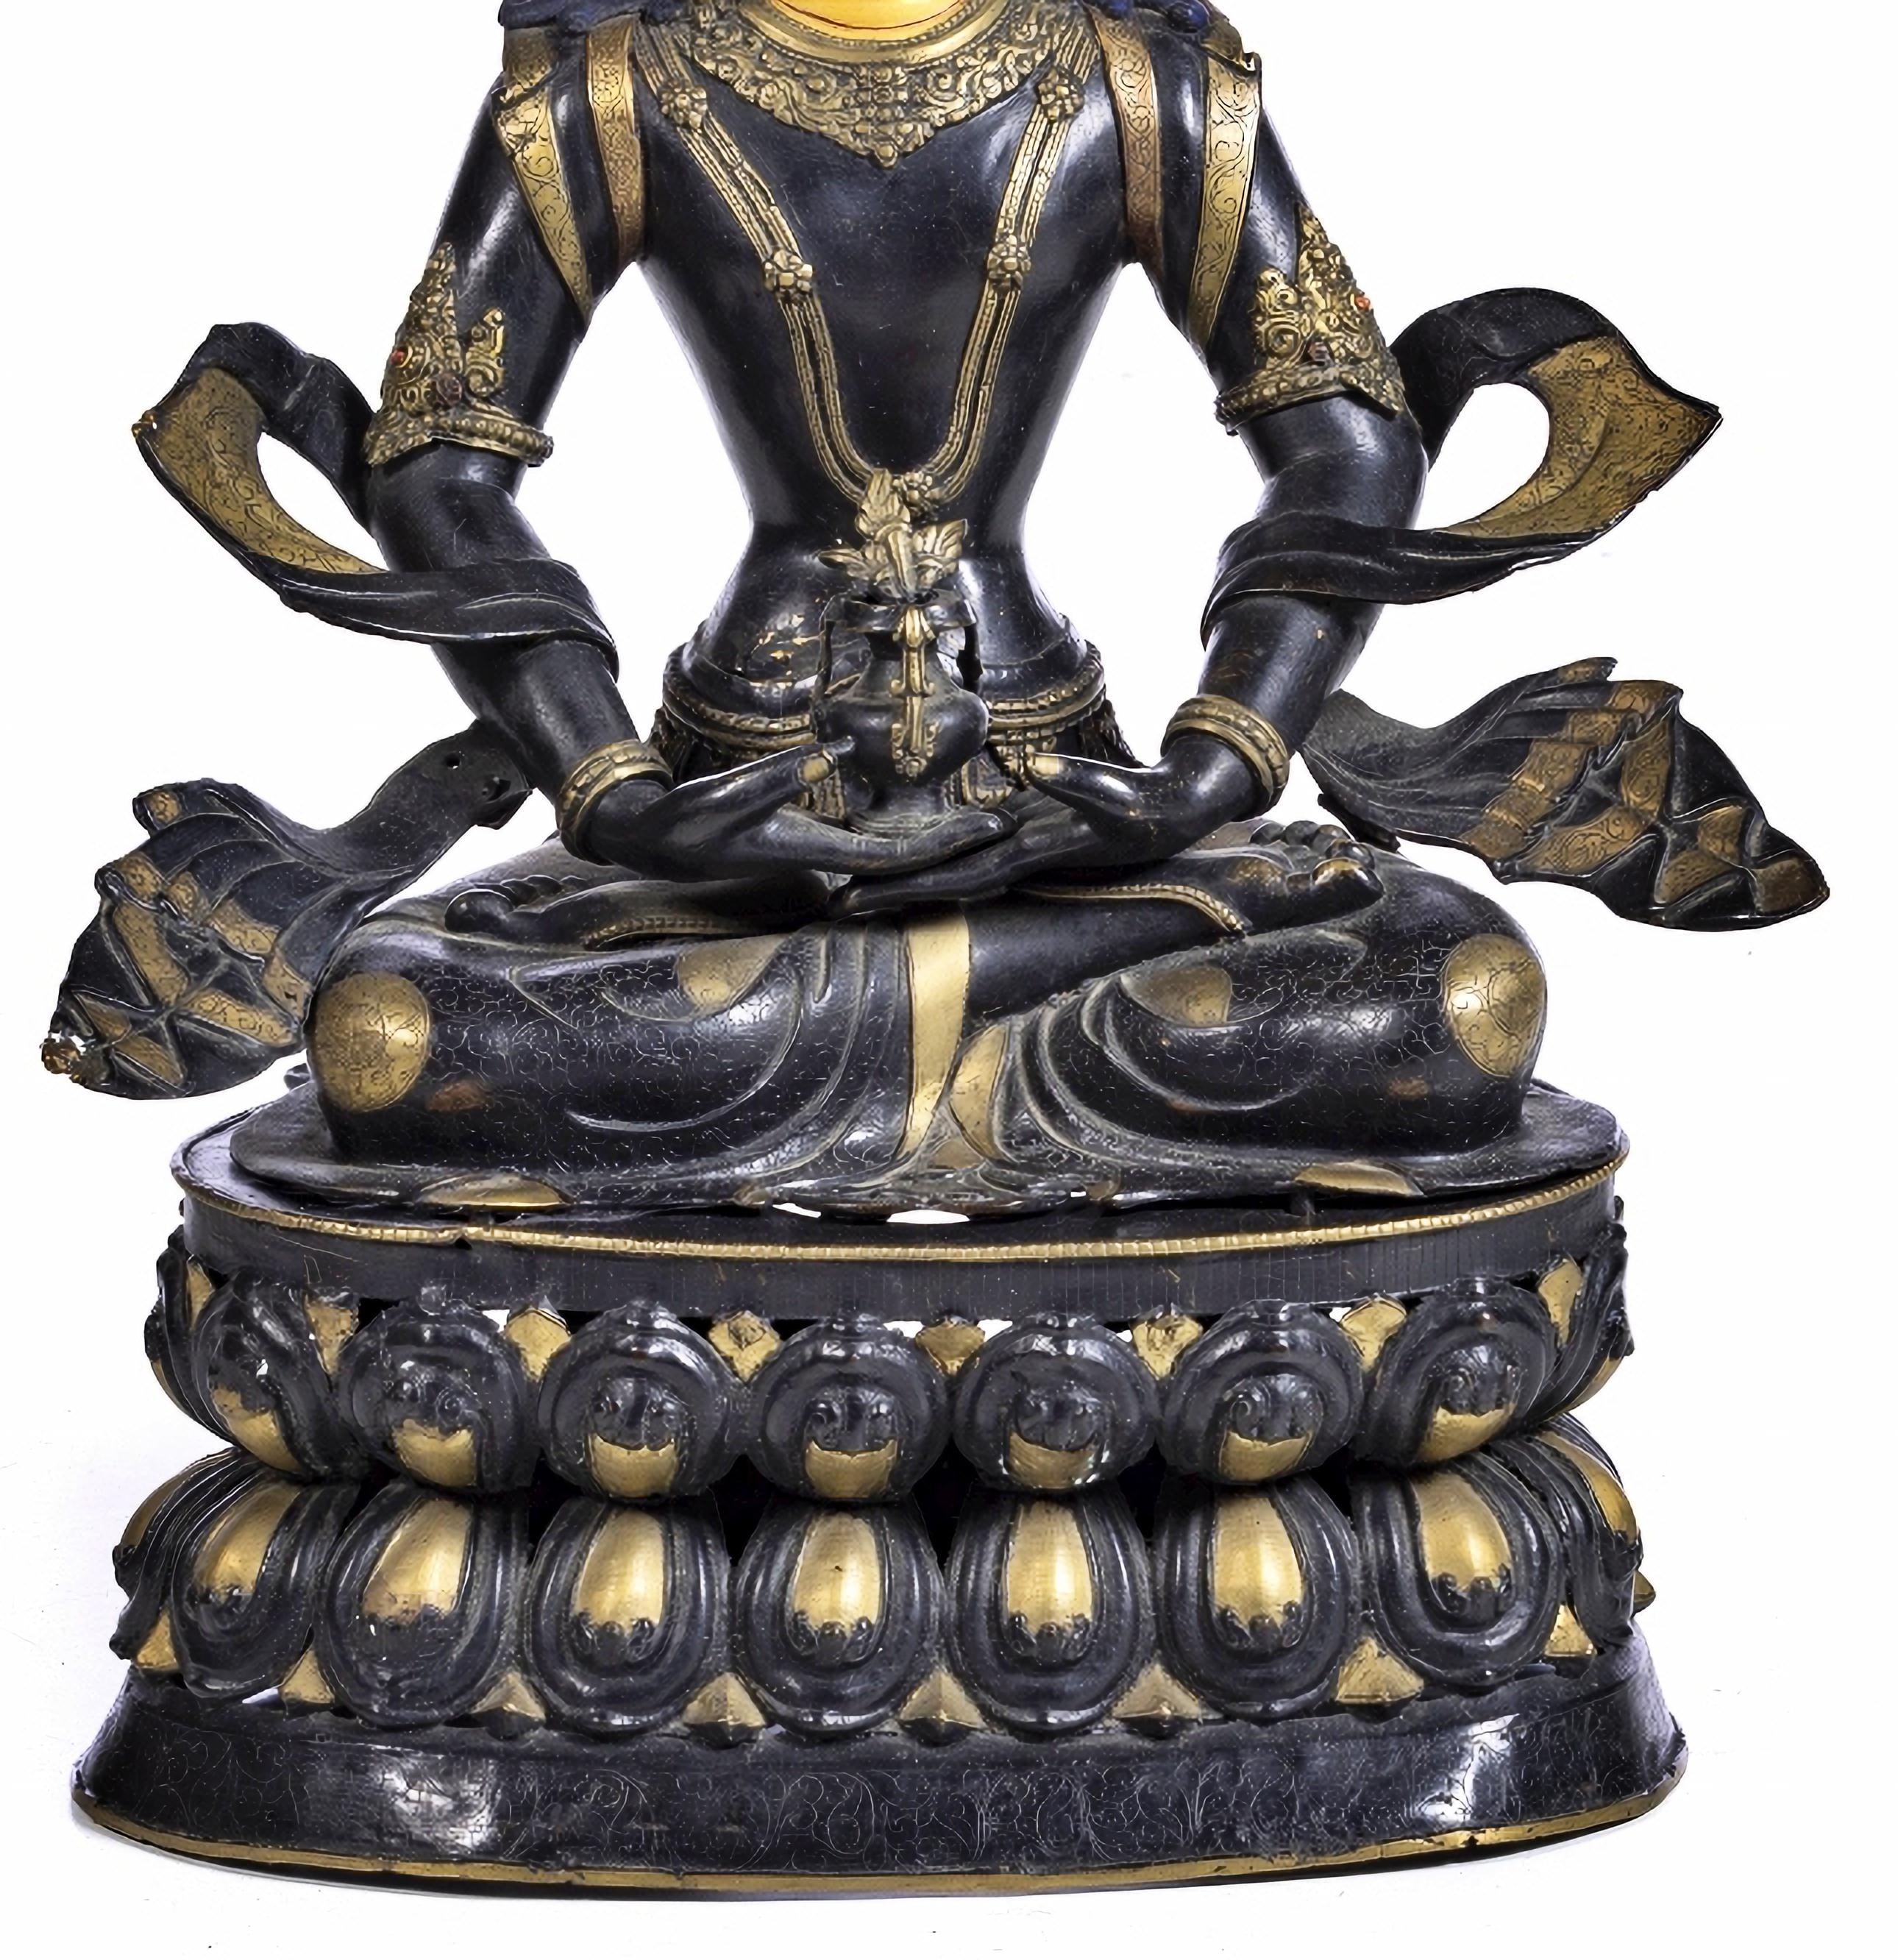 Guanyin buddha in meditation

Chinese sculpture from the Minguo period (1912-1949) in bronze. Polychrome decoration.
Dim.: 80 x 50 x 32 cm
Good conditions.